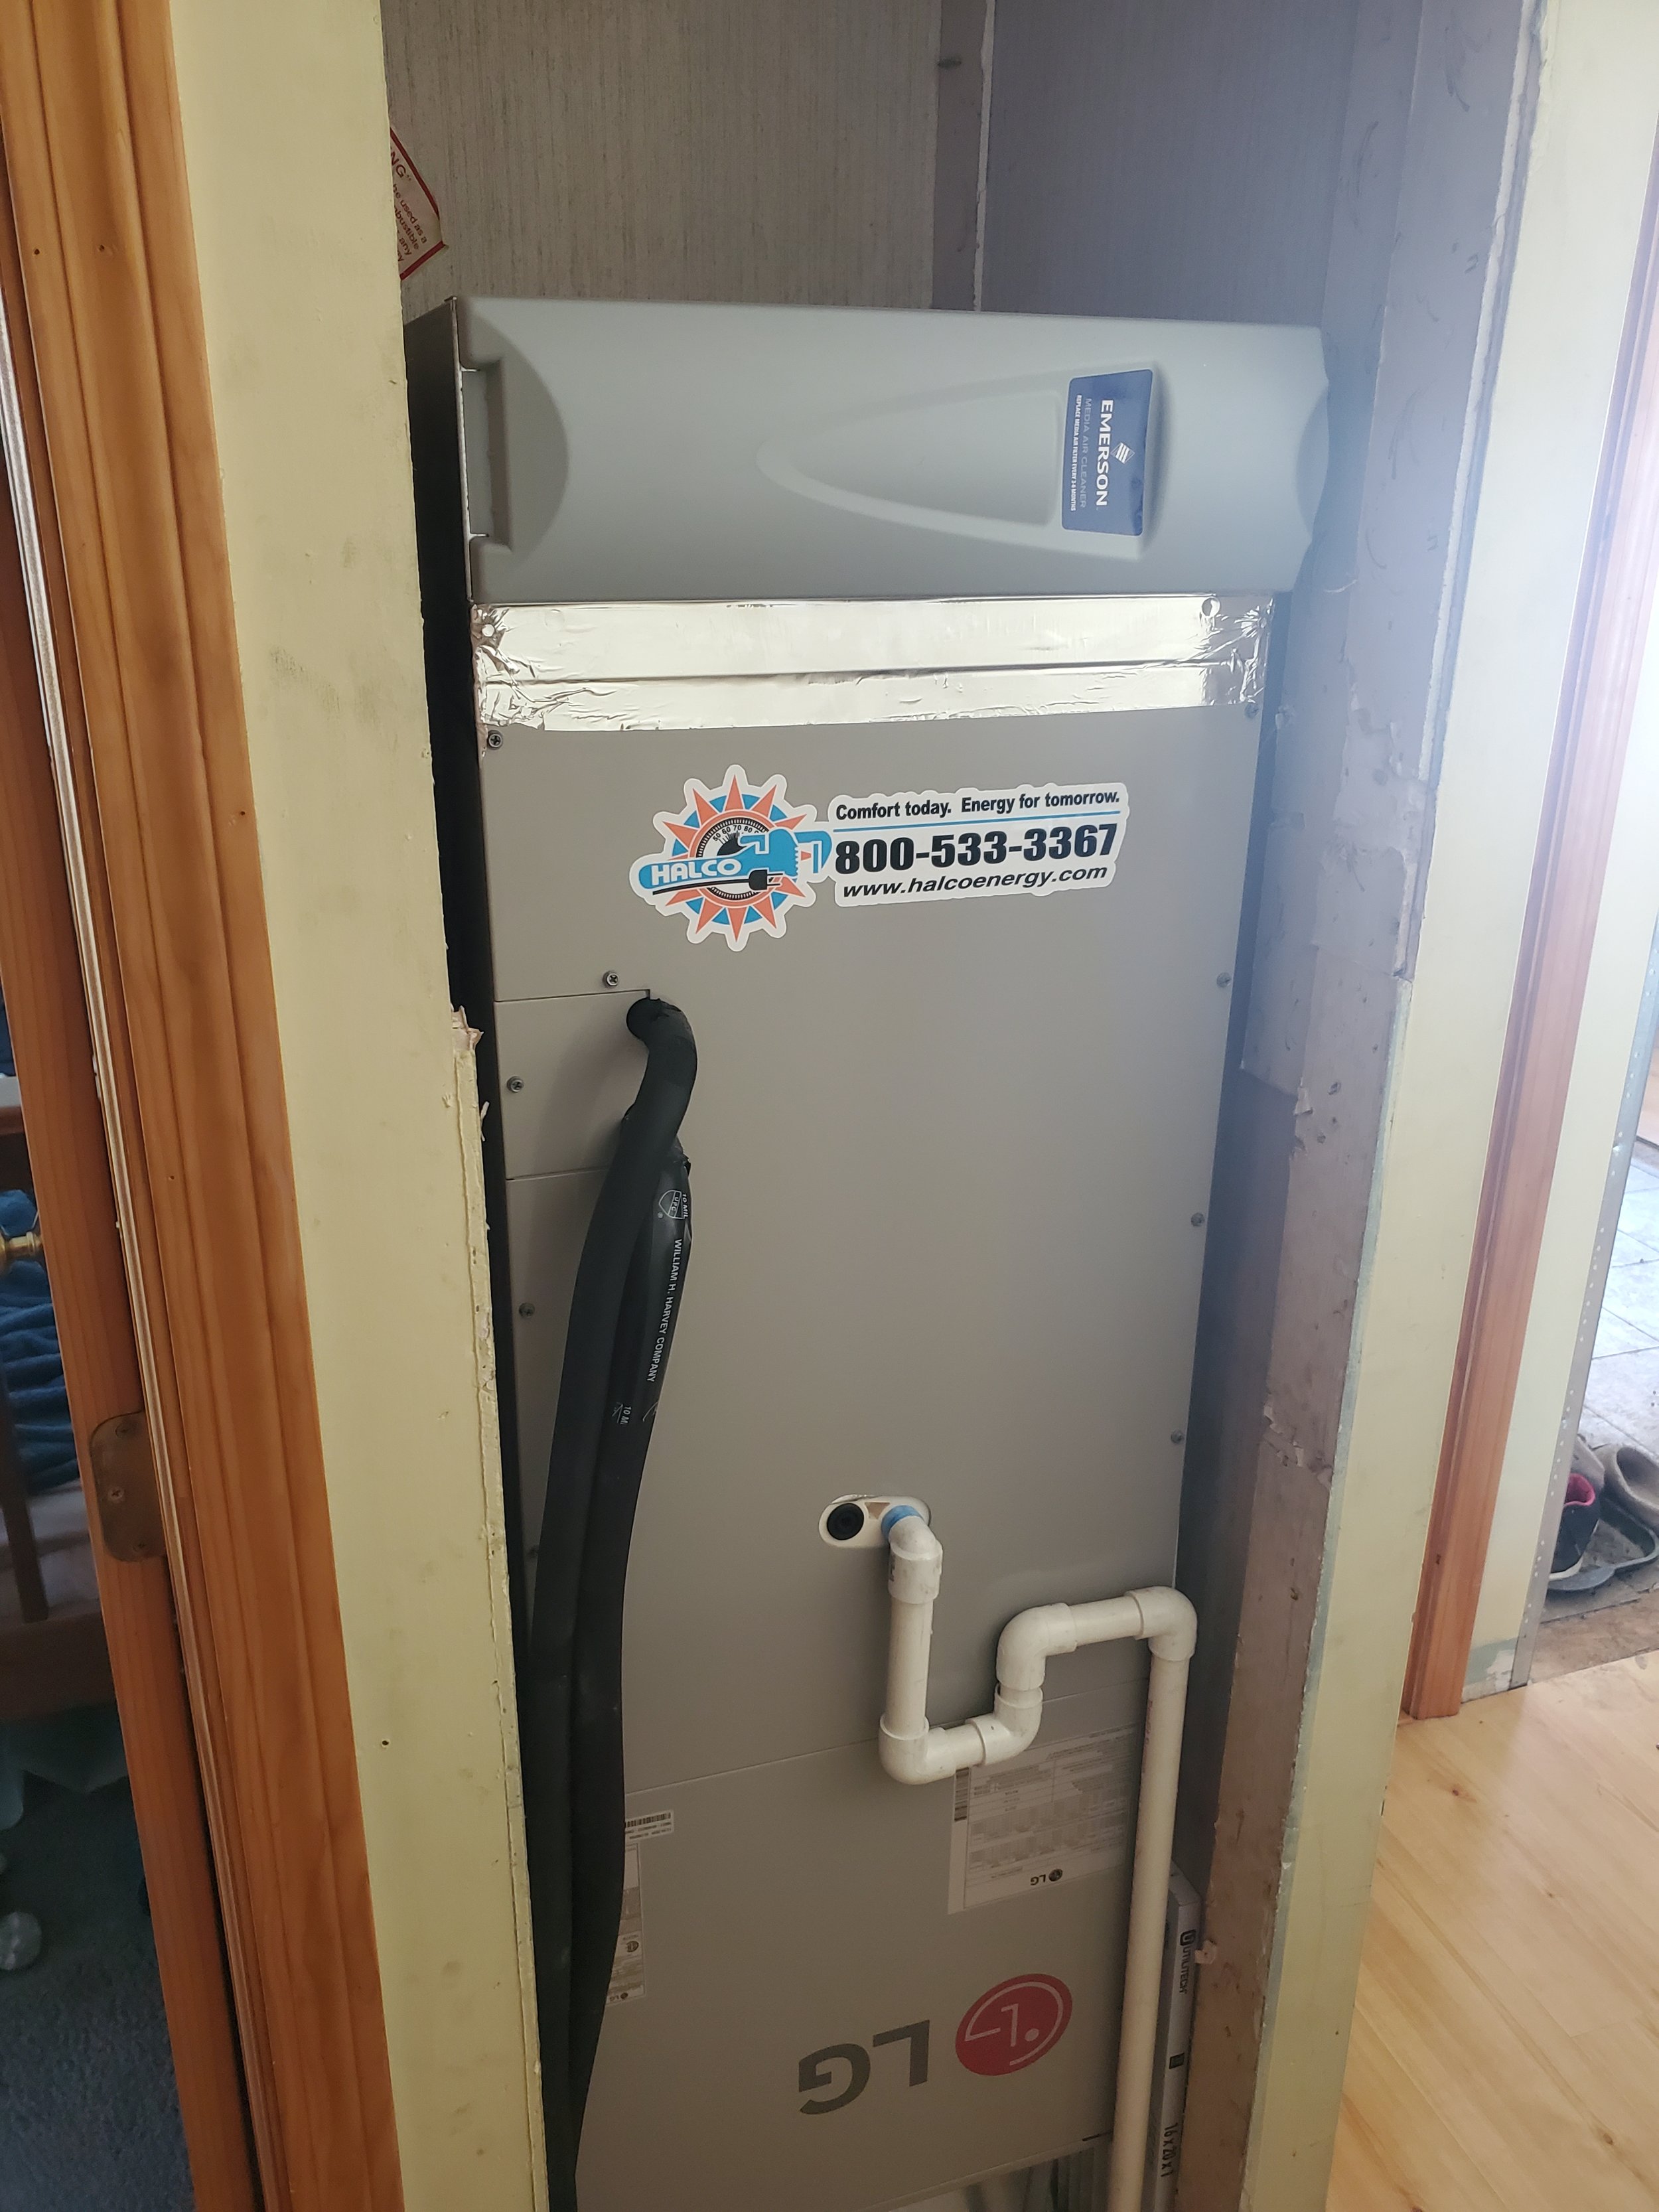 Mobile home ducted retrofit of air source heat pump